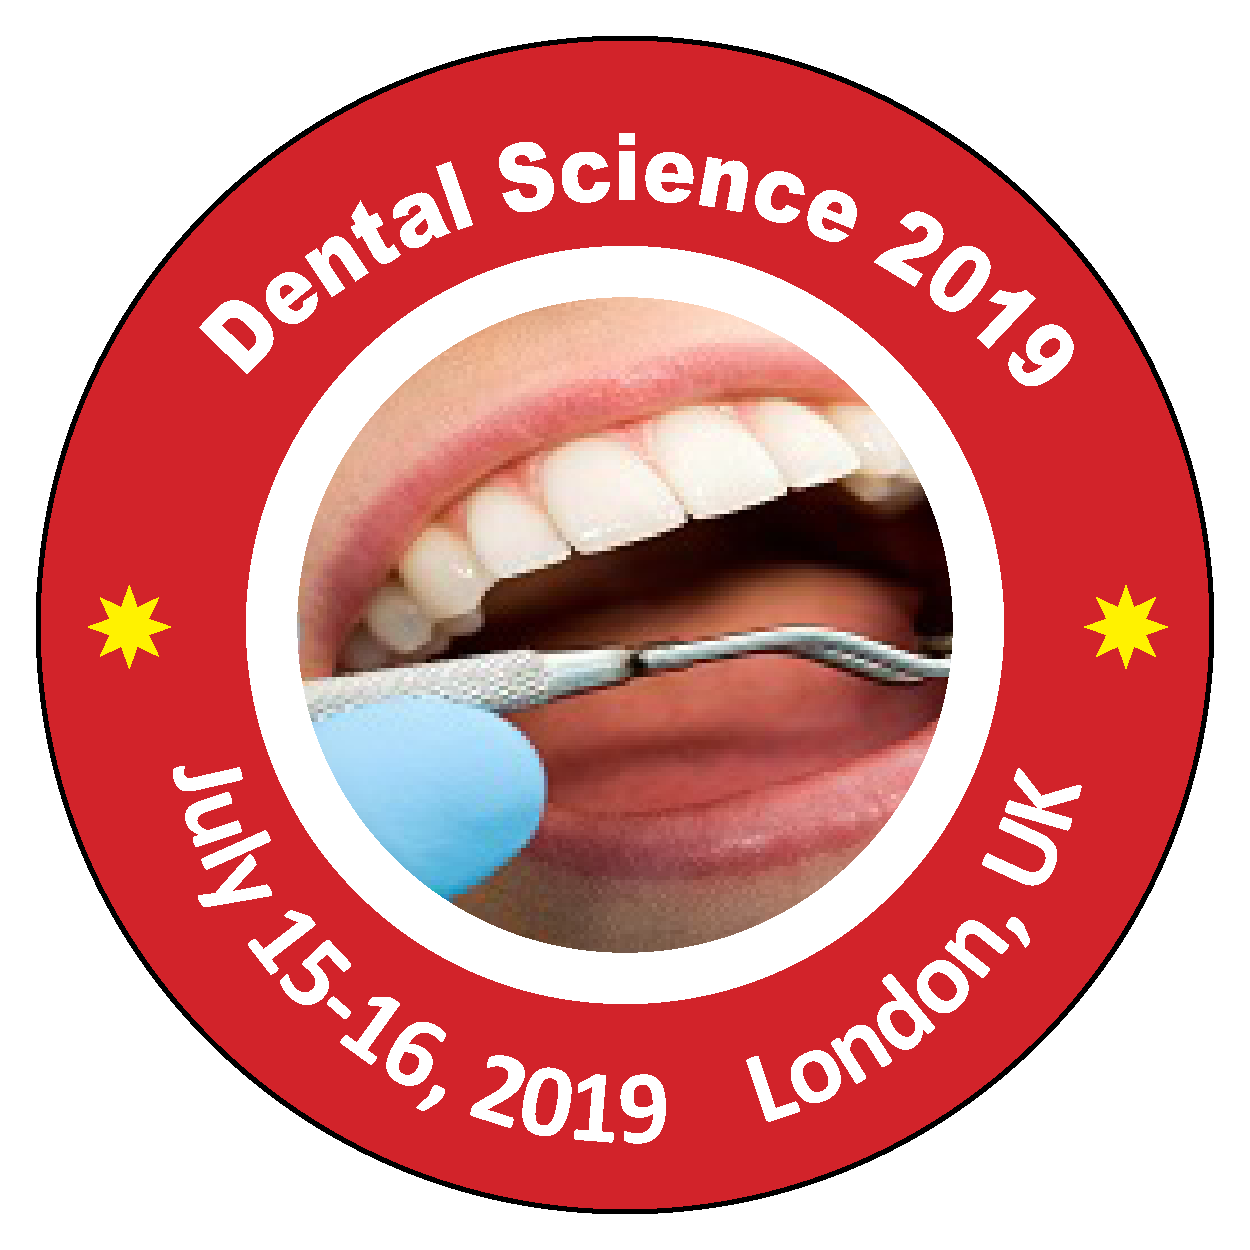 27th Global Summit Expo on Dental Science and Dental Practice, London, United Kingdom